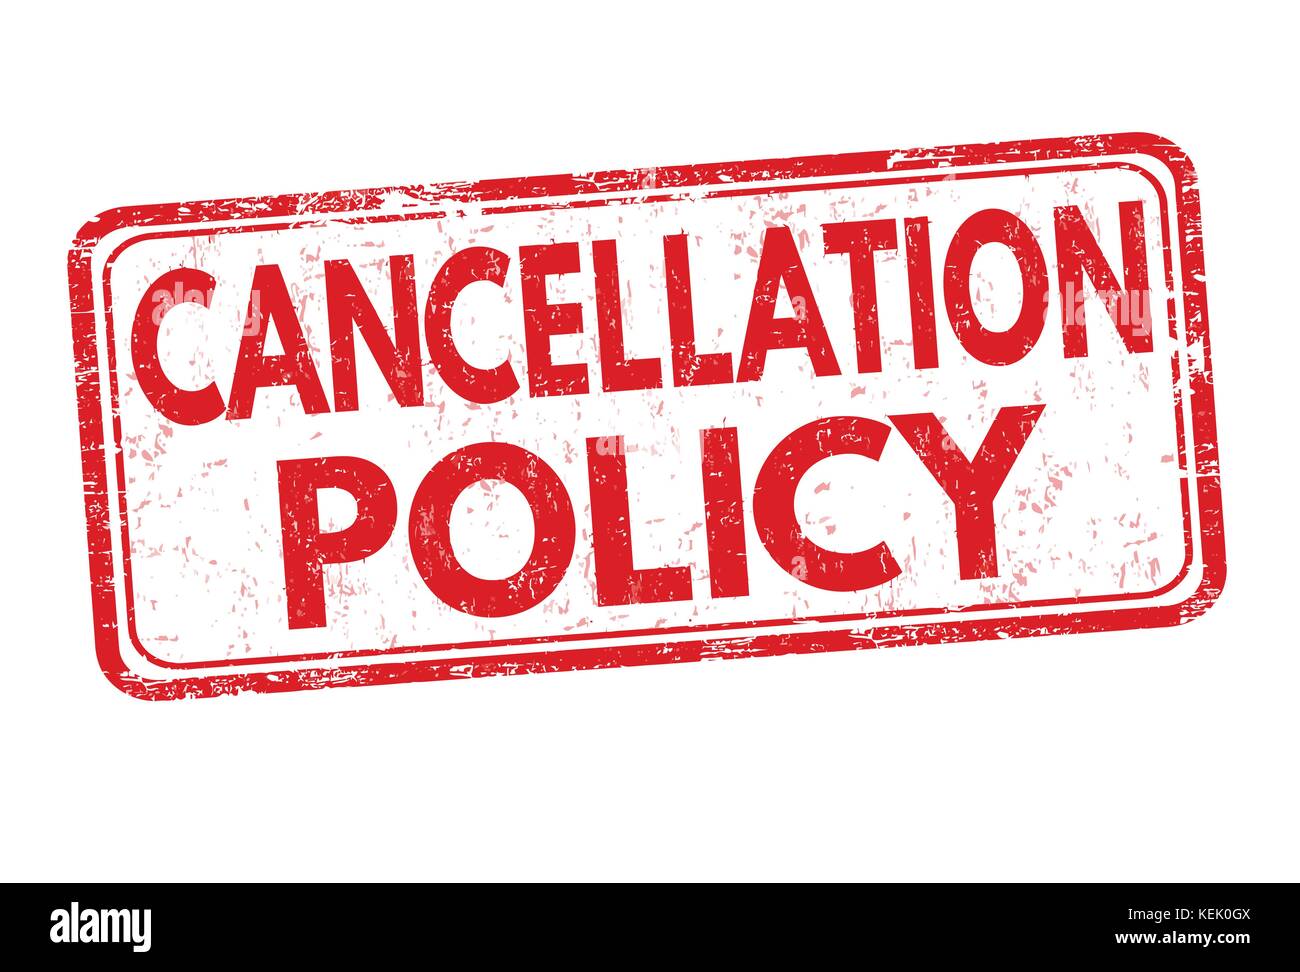 Cancellation policy grunge rubber stamp on white background, vector illustration Stock Vector